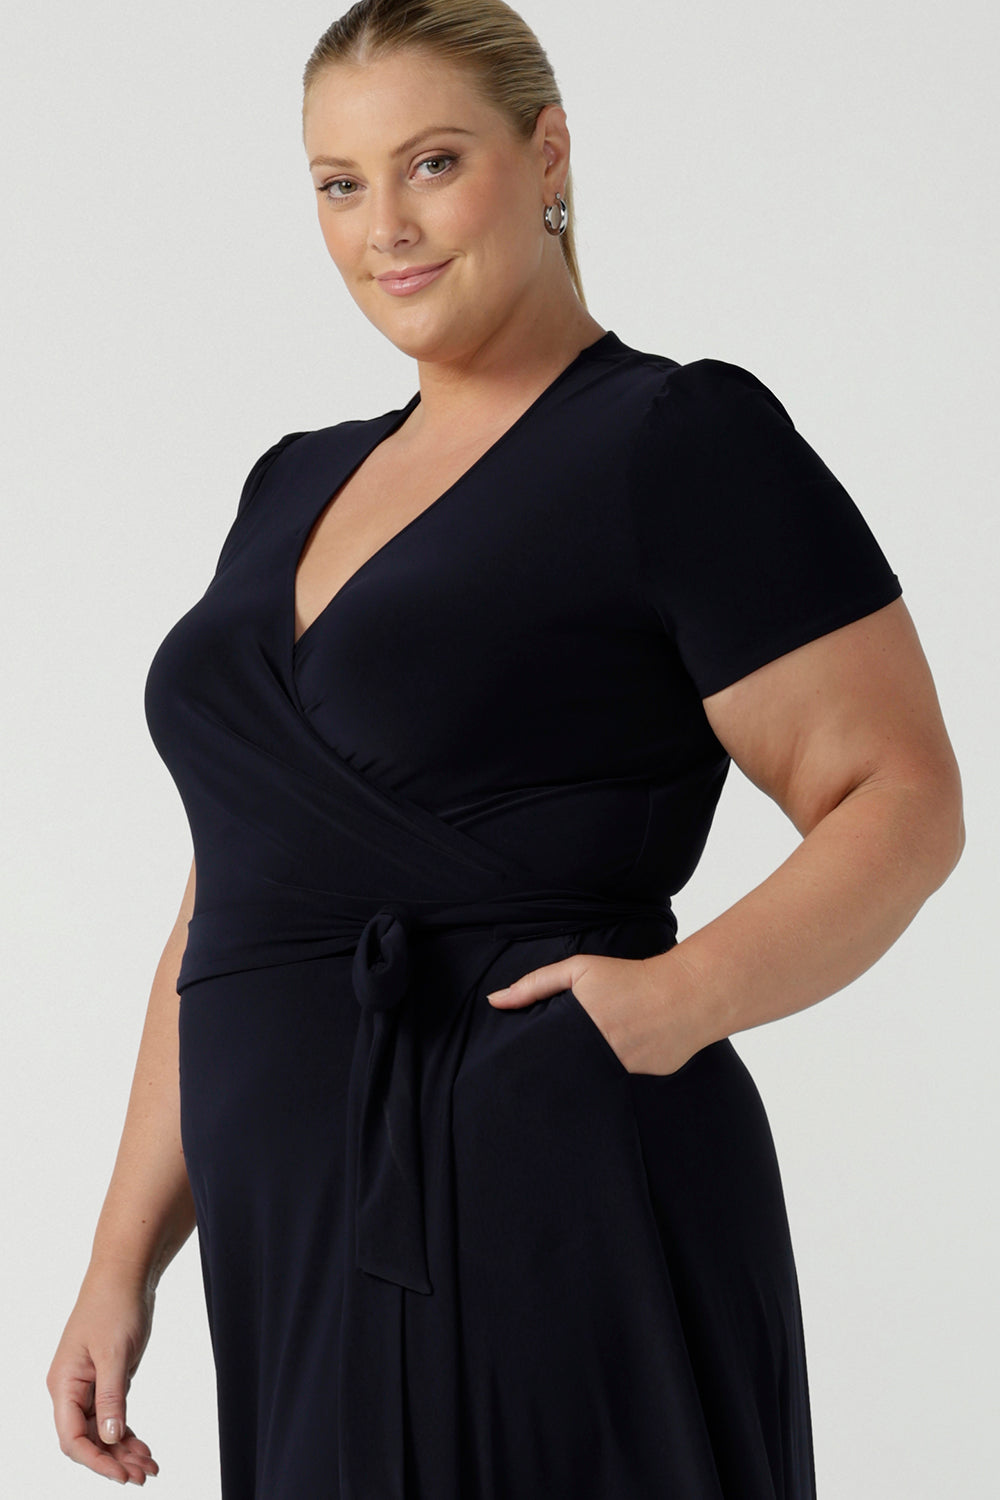 Close up of a curvy, size 18 woman wearing a navy, wrap dress with short sleeves. A great dress for summer casual wear, or for travel. Shop made in Australia dresses in petite to plus sizes online at Australian fashion brand, Leina & Fleur.